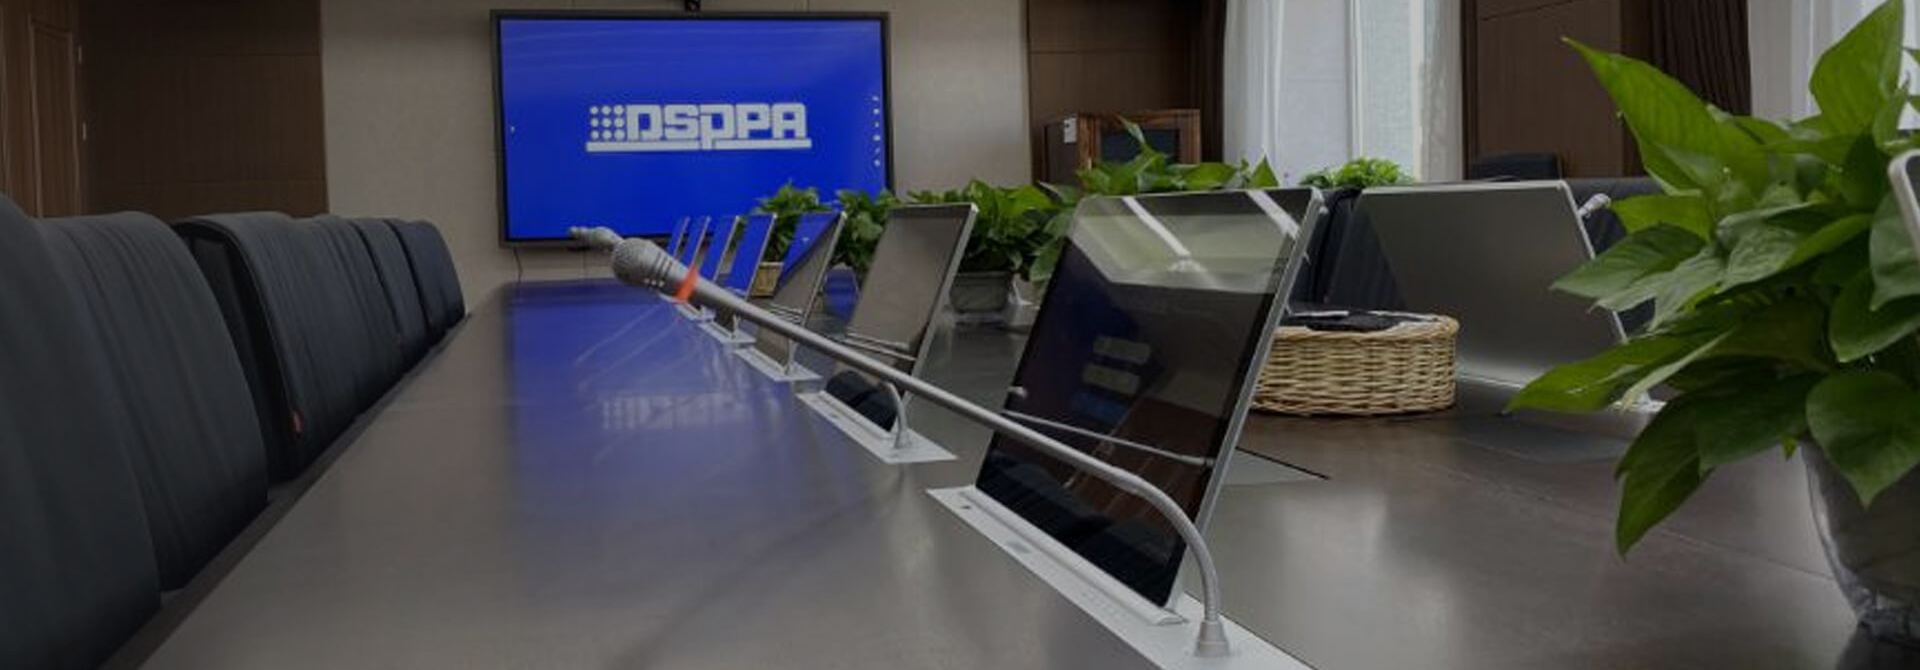 Paperless Conference System | Project Gallerya